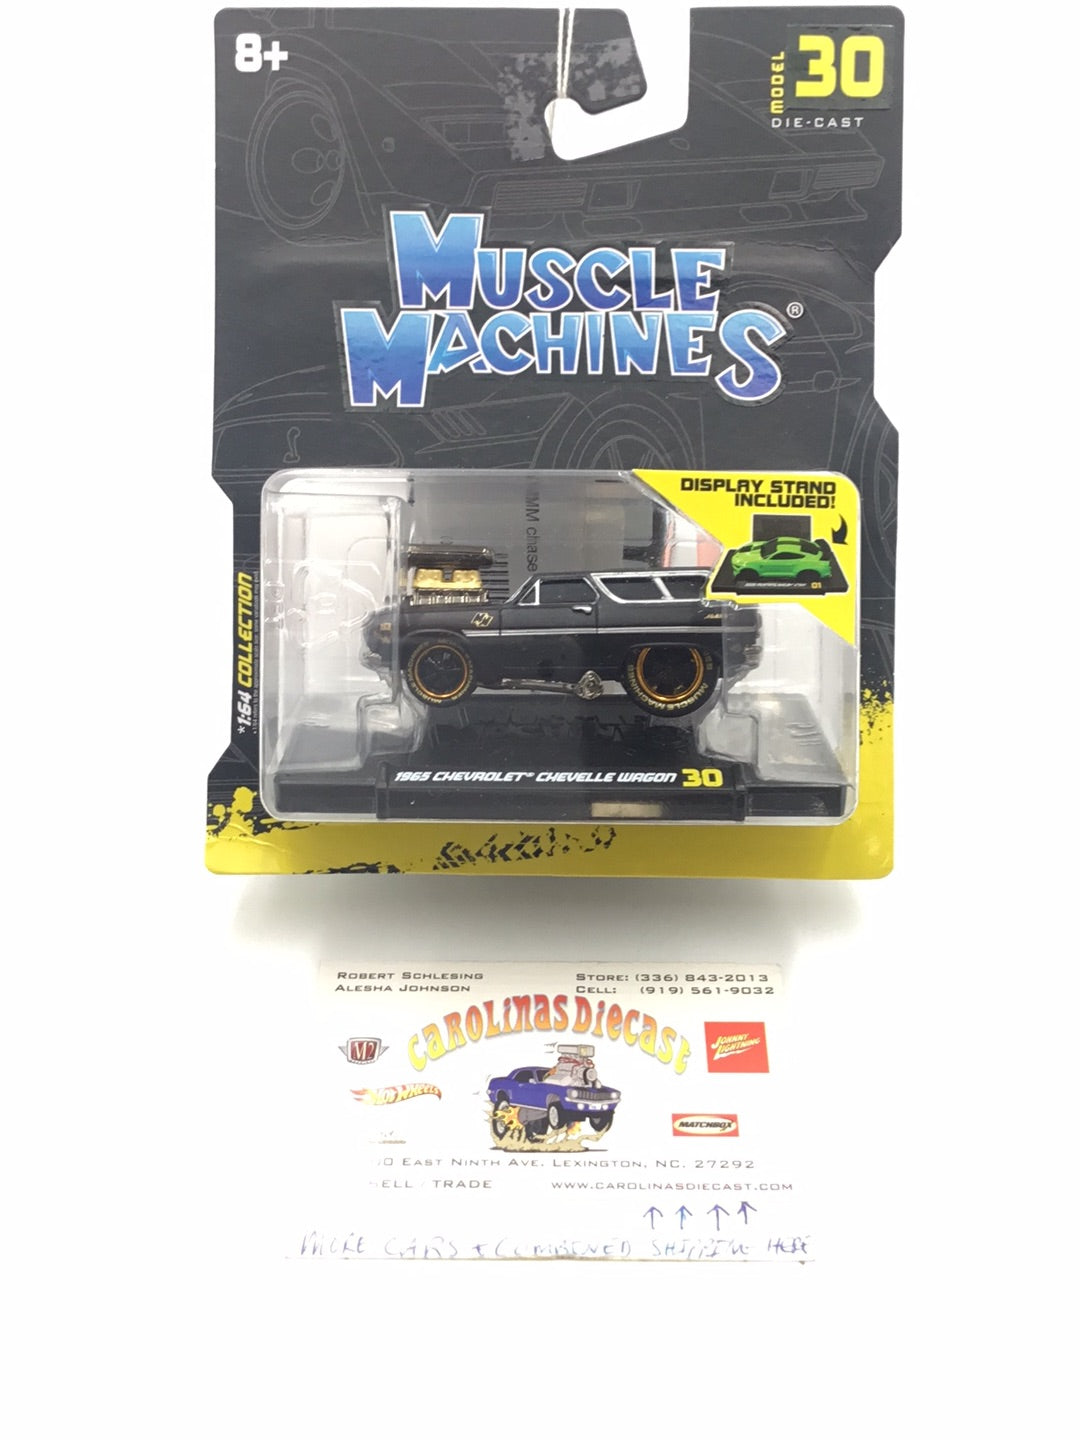 Muscle machines model #30 1965 Chevrolet Chevelle Wagon chase